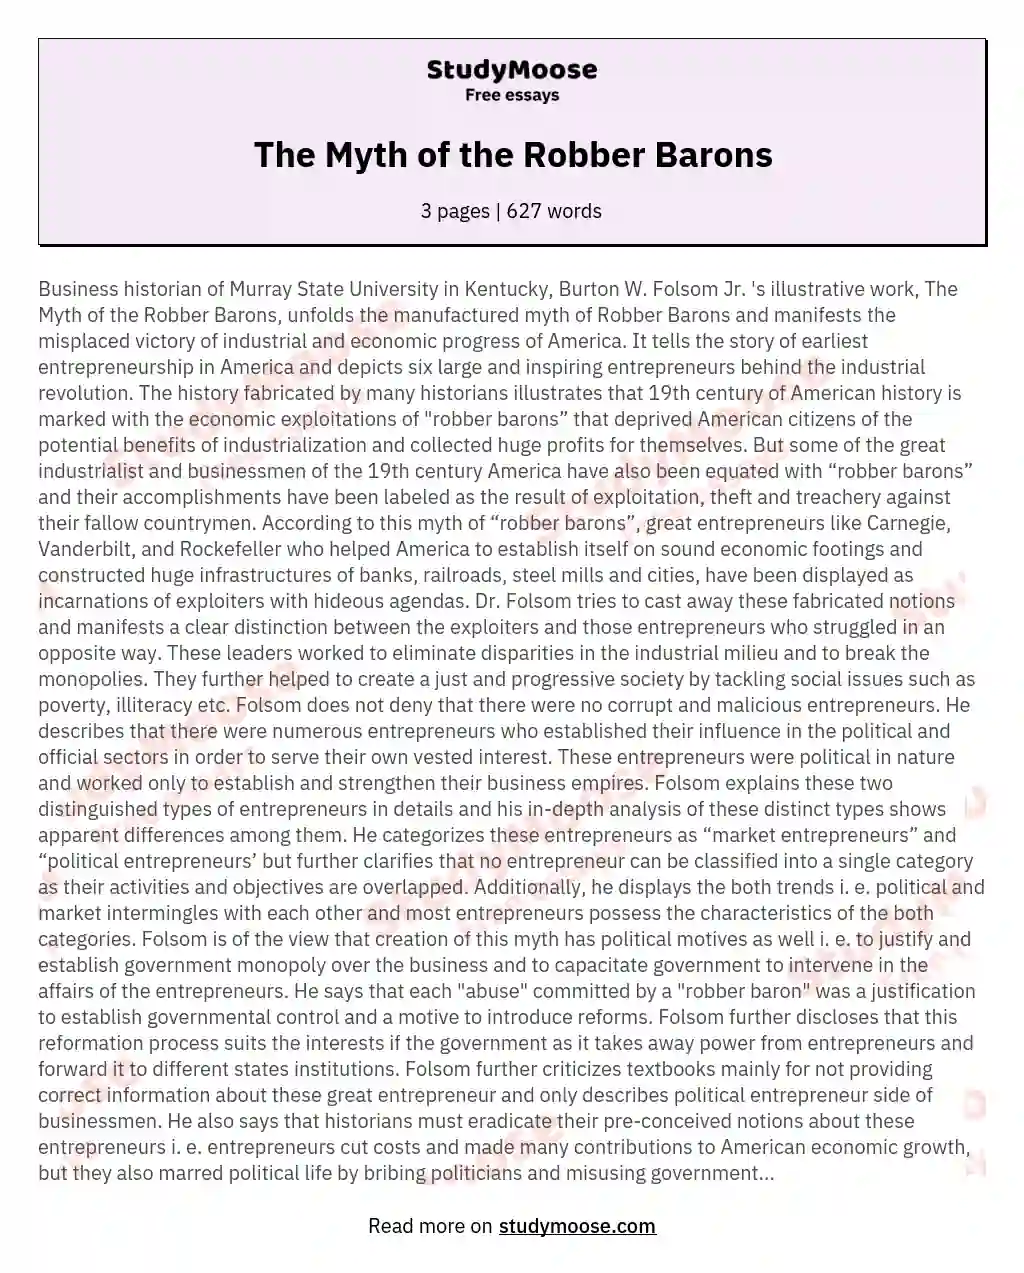 The Myth of the Robber Barons essay